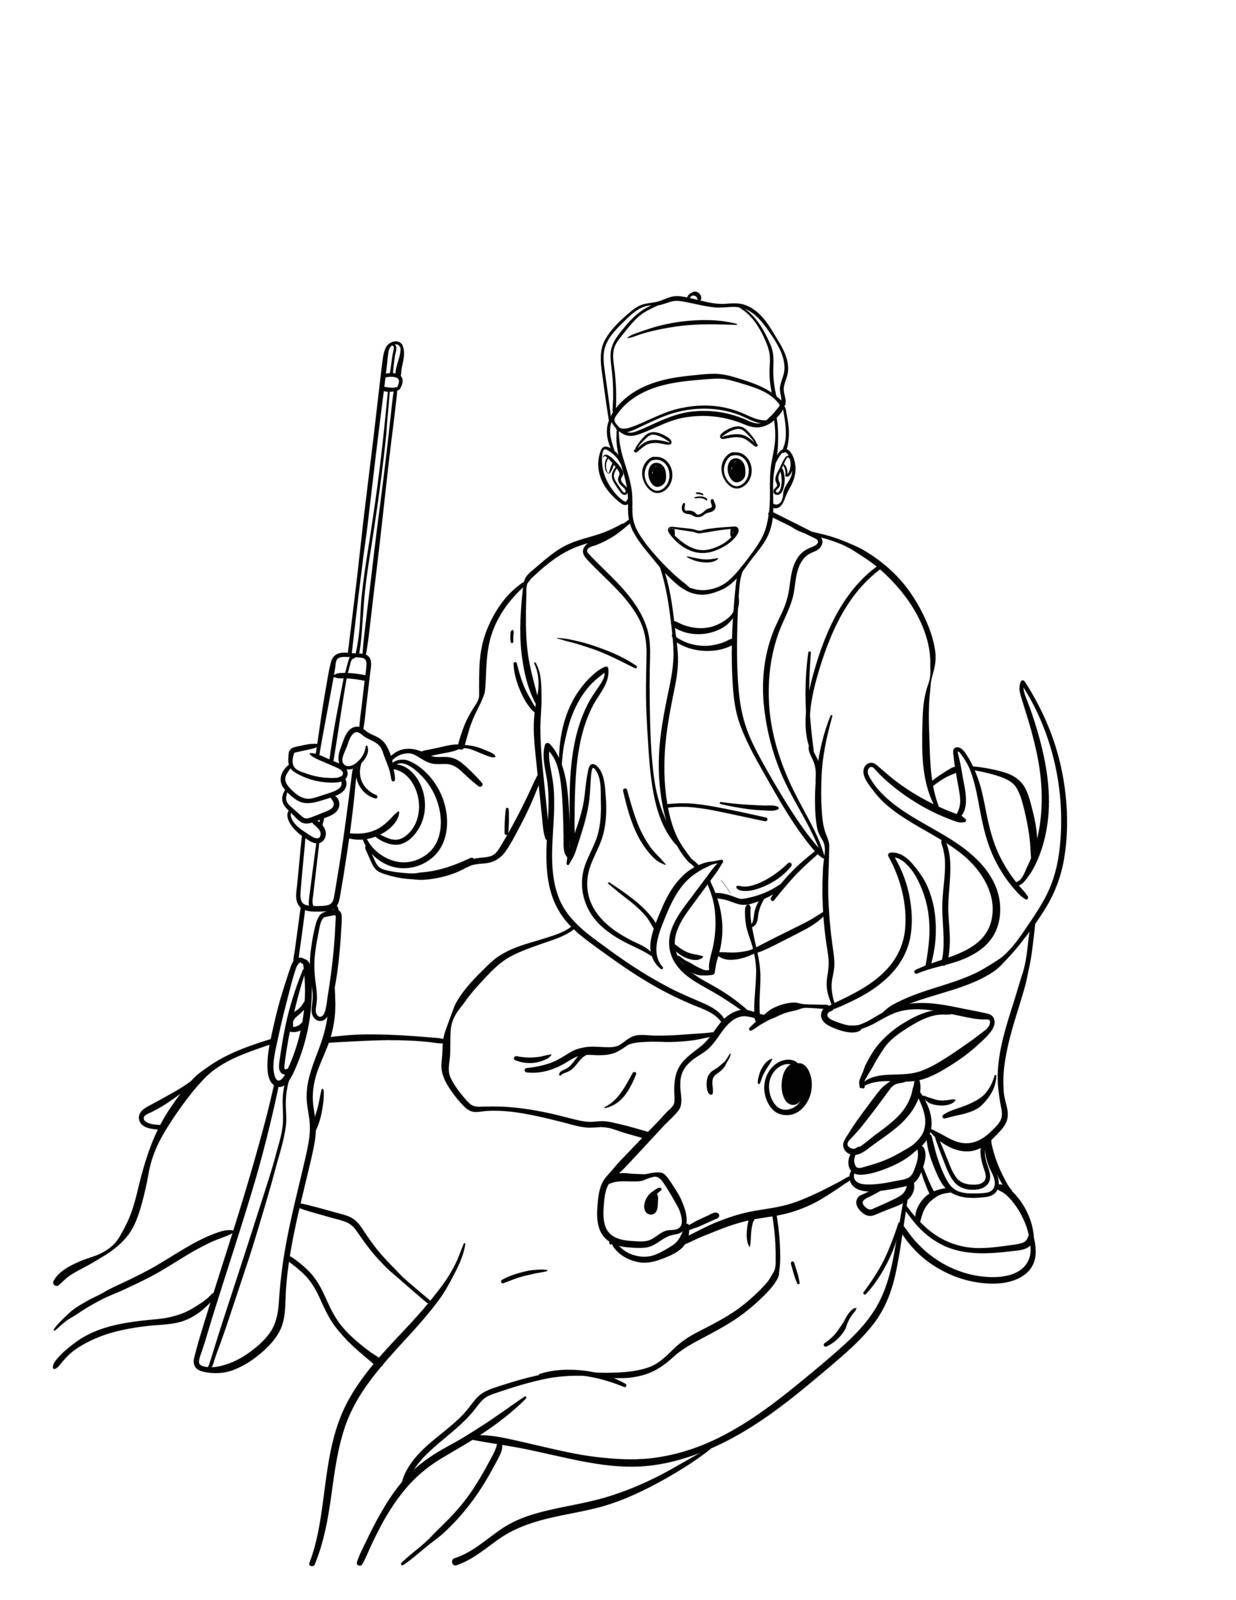 Deer Hunting Isolated Coloring Page for Kids by abbydesign